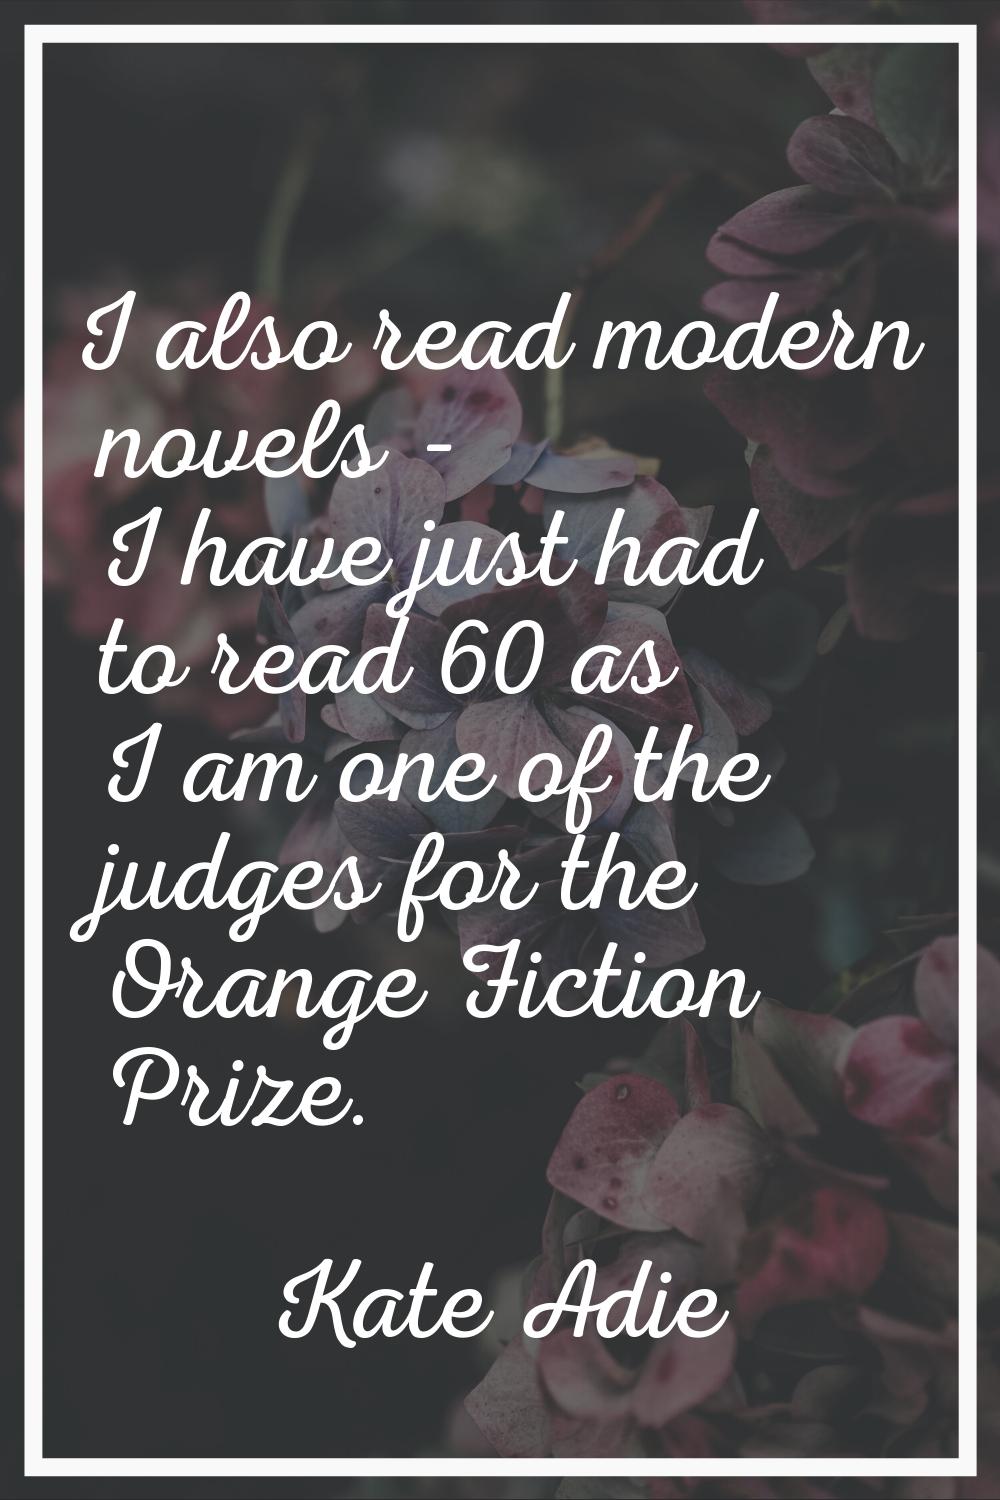 I also read modern novels - I have just had to read 60 as I am one of the judges for the Orange Fic